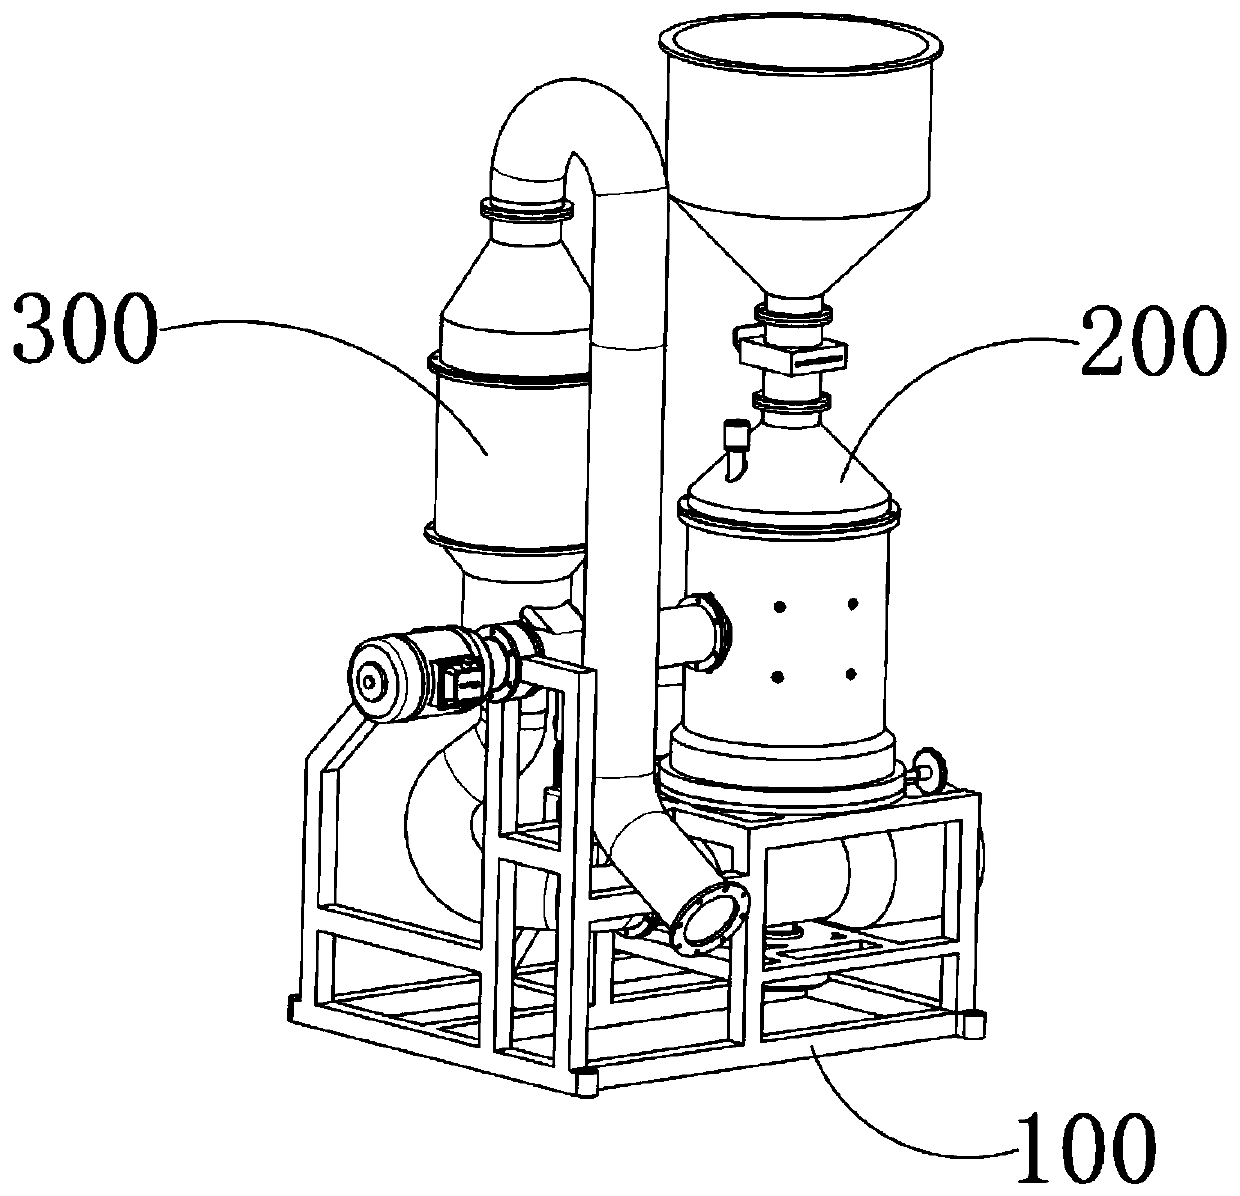 Rice fine grinding and milling process